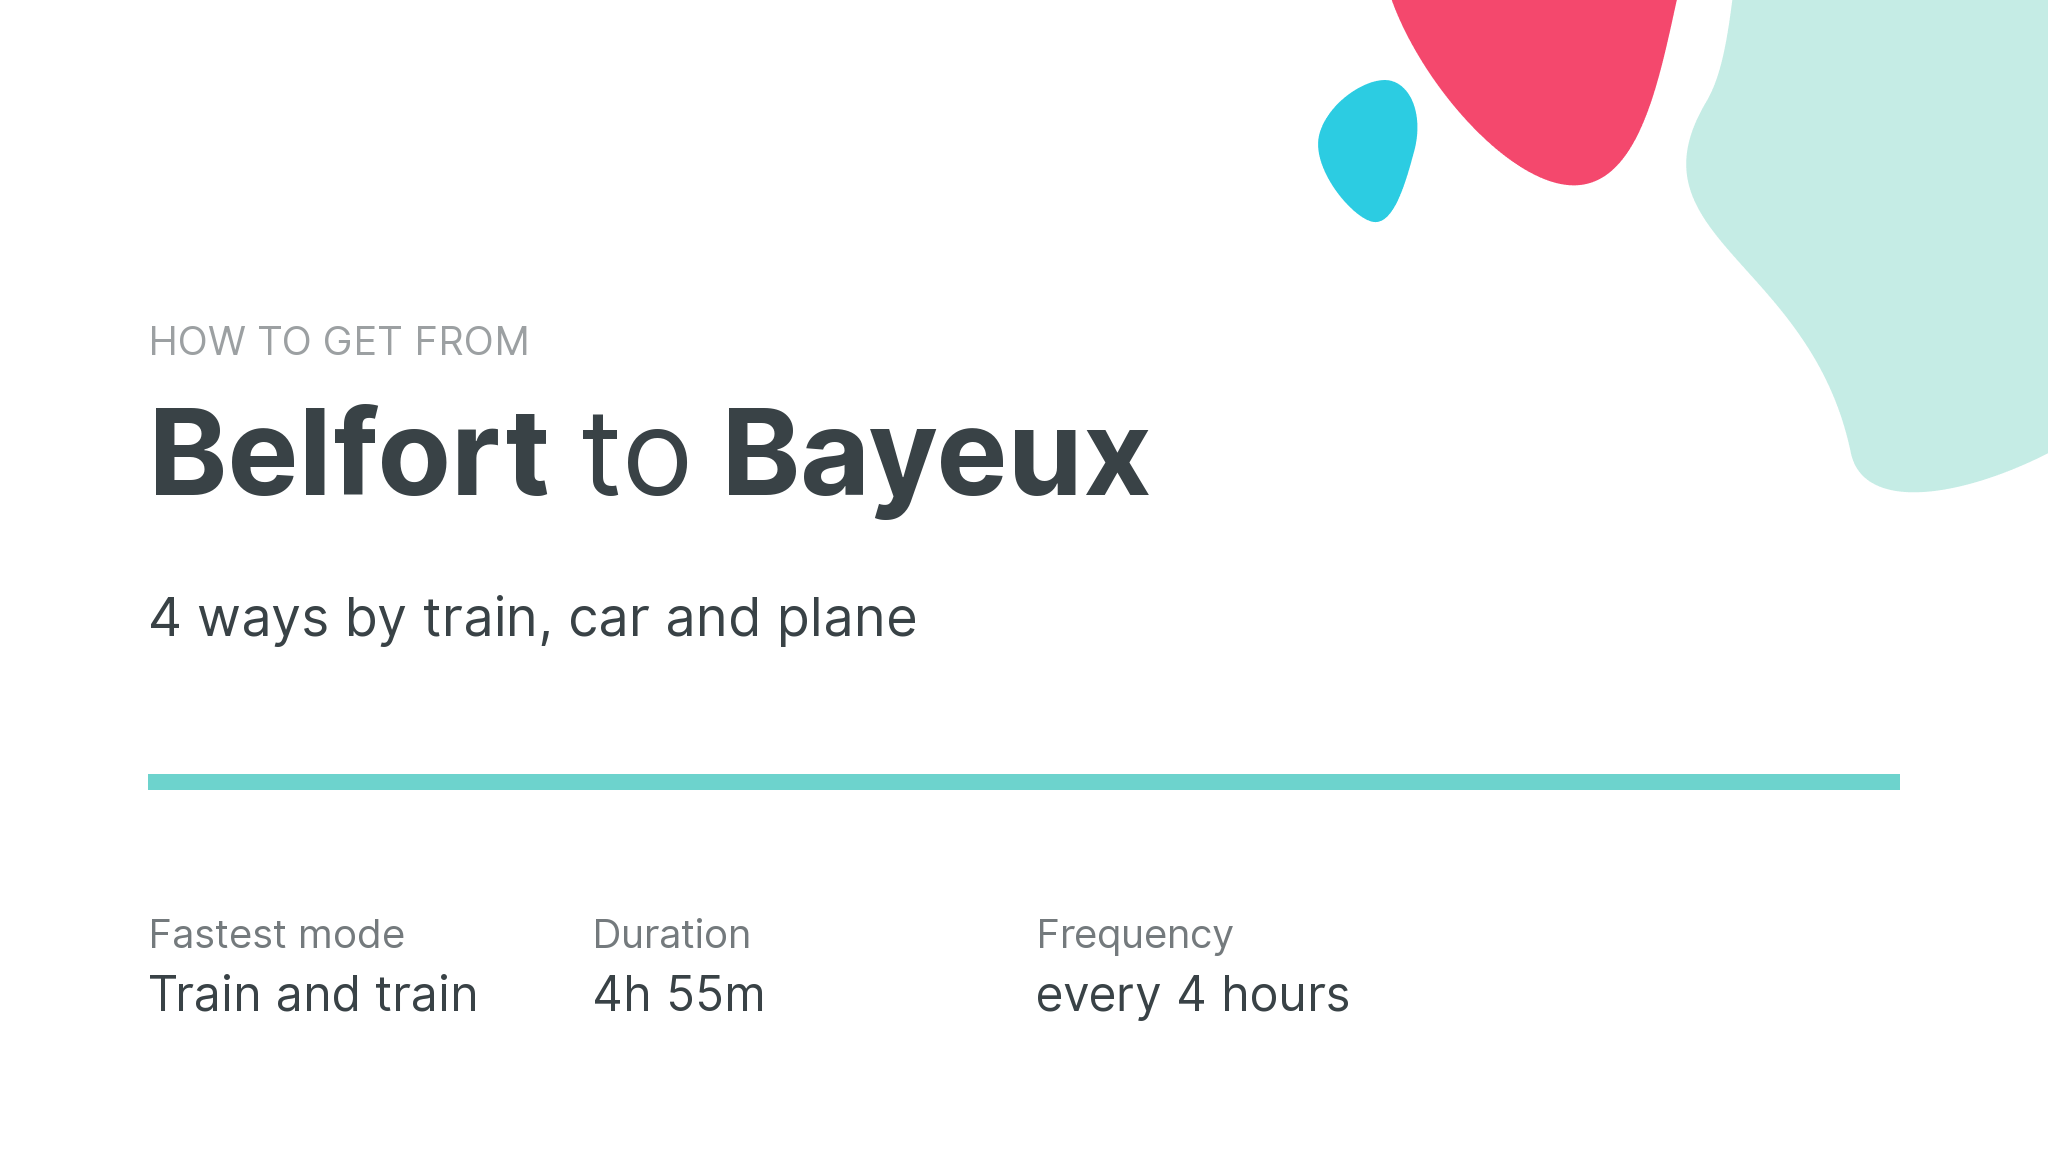 How do I get from Belfort to Bayeux